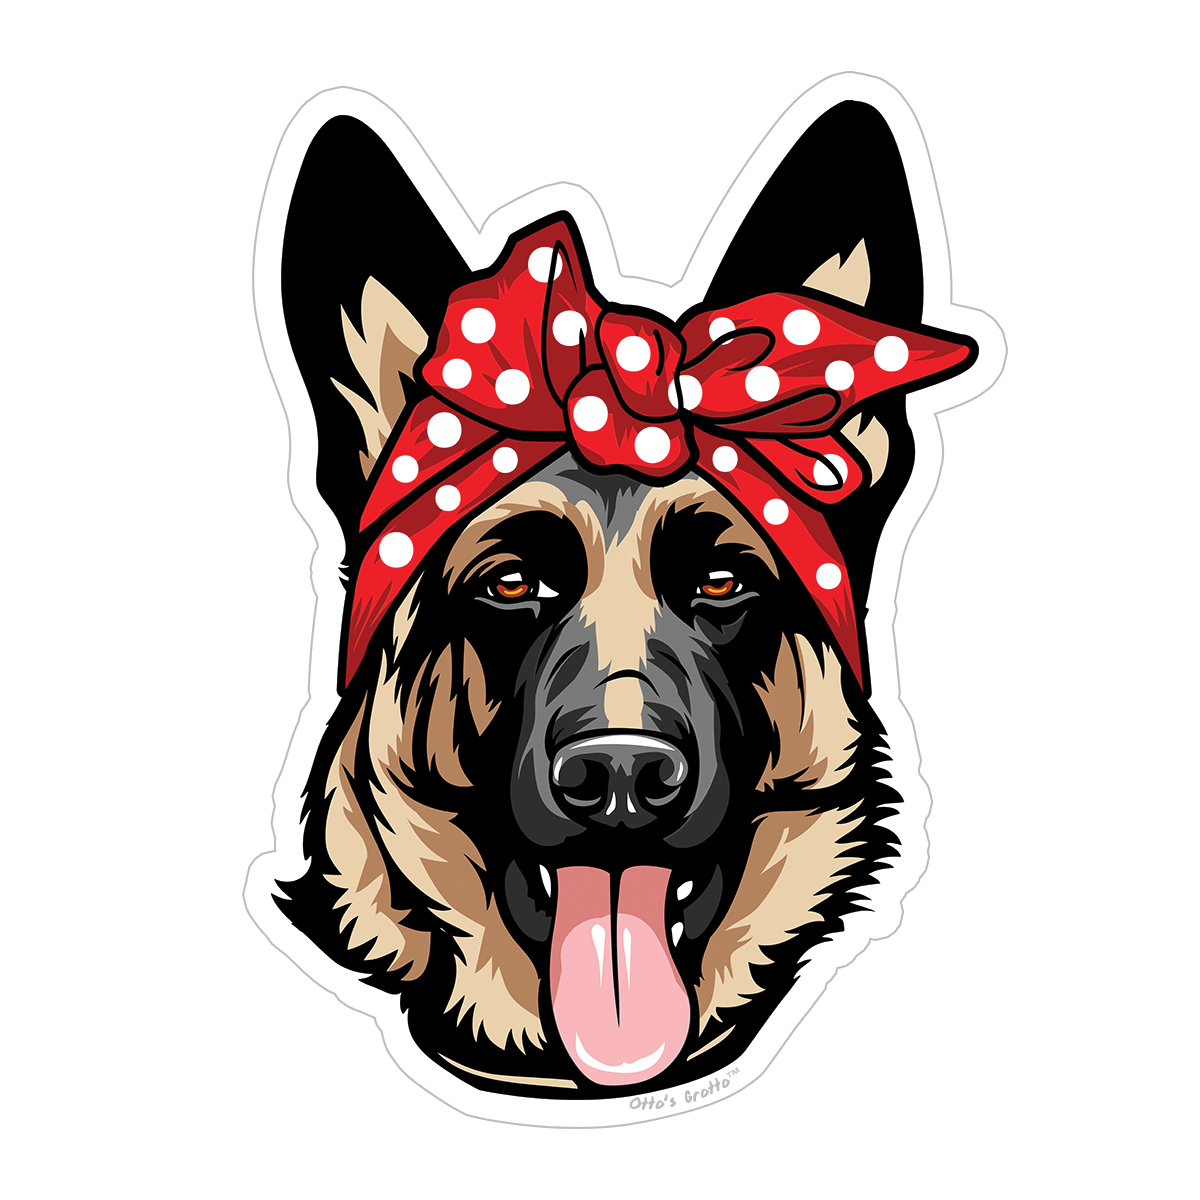 German Shepherd Sticker Red Polka Dot Bow Bandana Cute GSD Dog Decal for Car, Hydroflask, Gifts Under 5 for GSD Shepherd Mom Owner